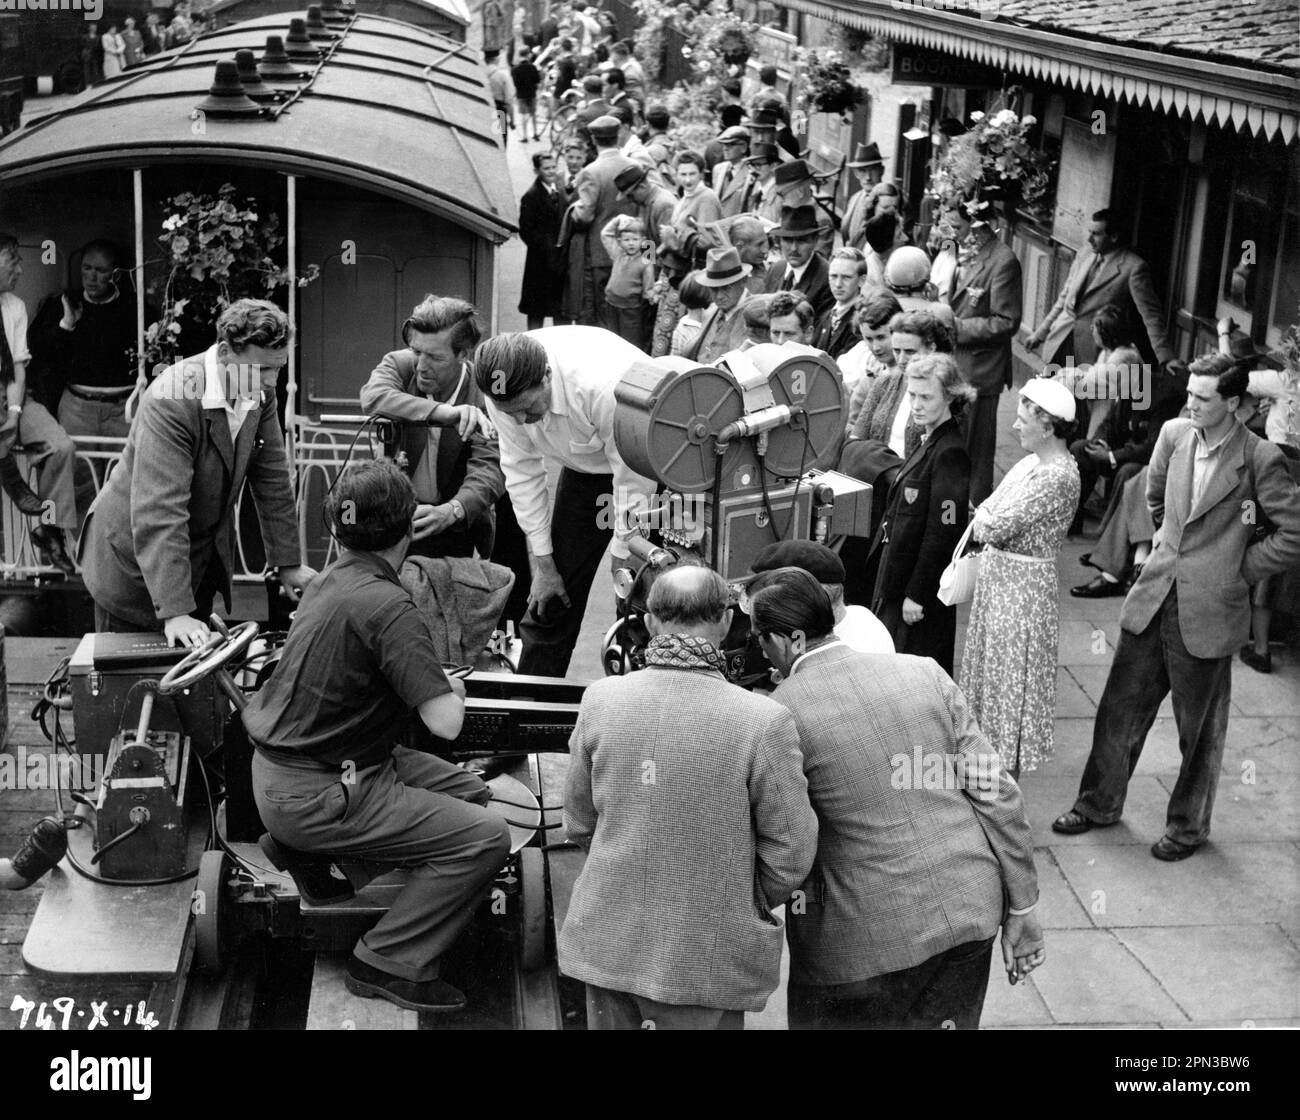 Director CHARLES CRICHTON and Camera / Movie Crew on set location candid filming a scene at railway station for THE TITFIELD THUNDERBOLT 1953 director CHARLES CRICHTON original screenplay T.E.B. Clarke music Georges Auric producer Michael Truman An Ealing Studios Michael Balcon Production / General Film Distributors (GFD) Stock Photo